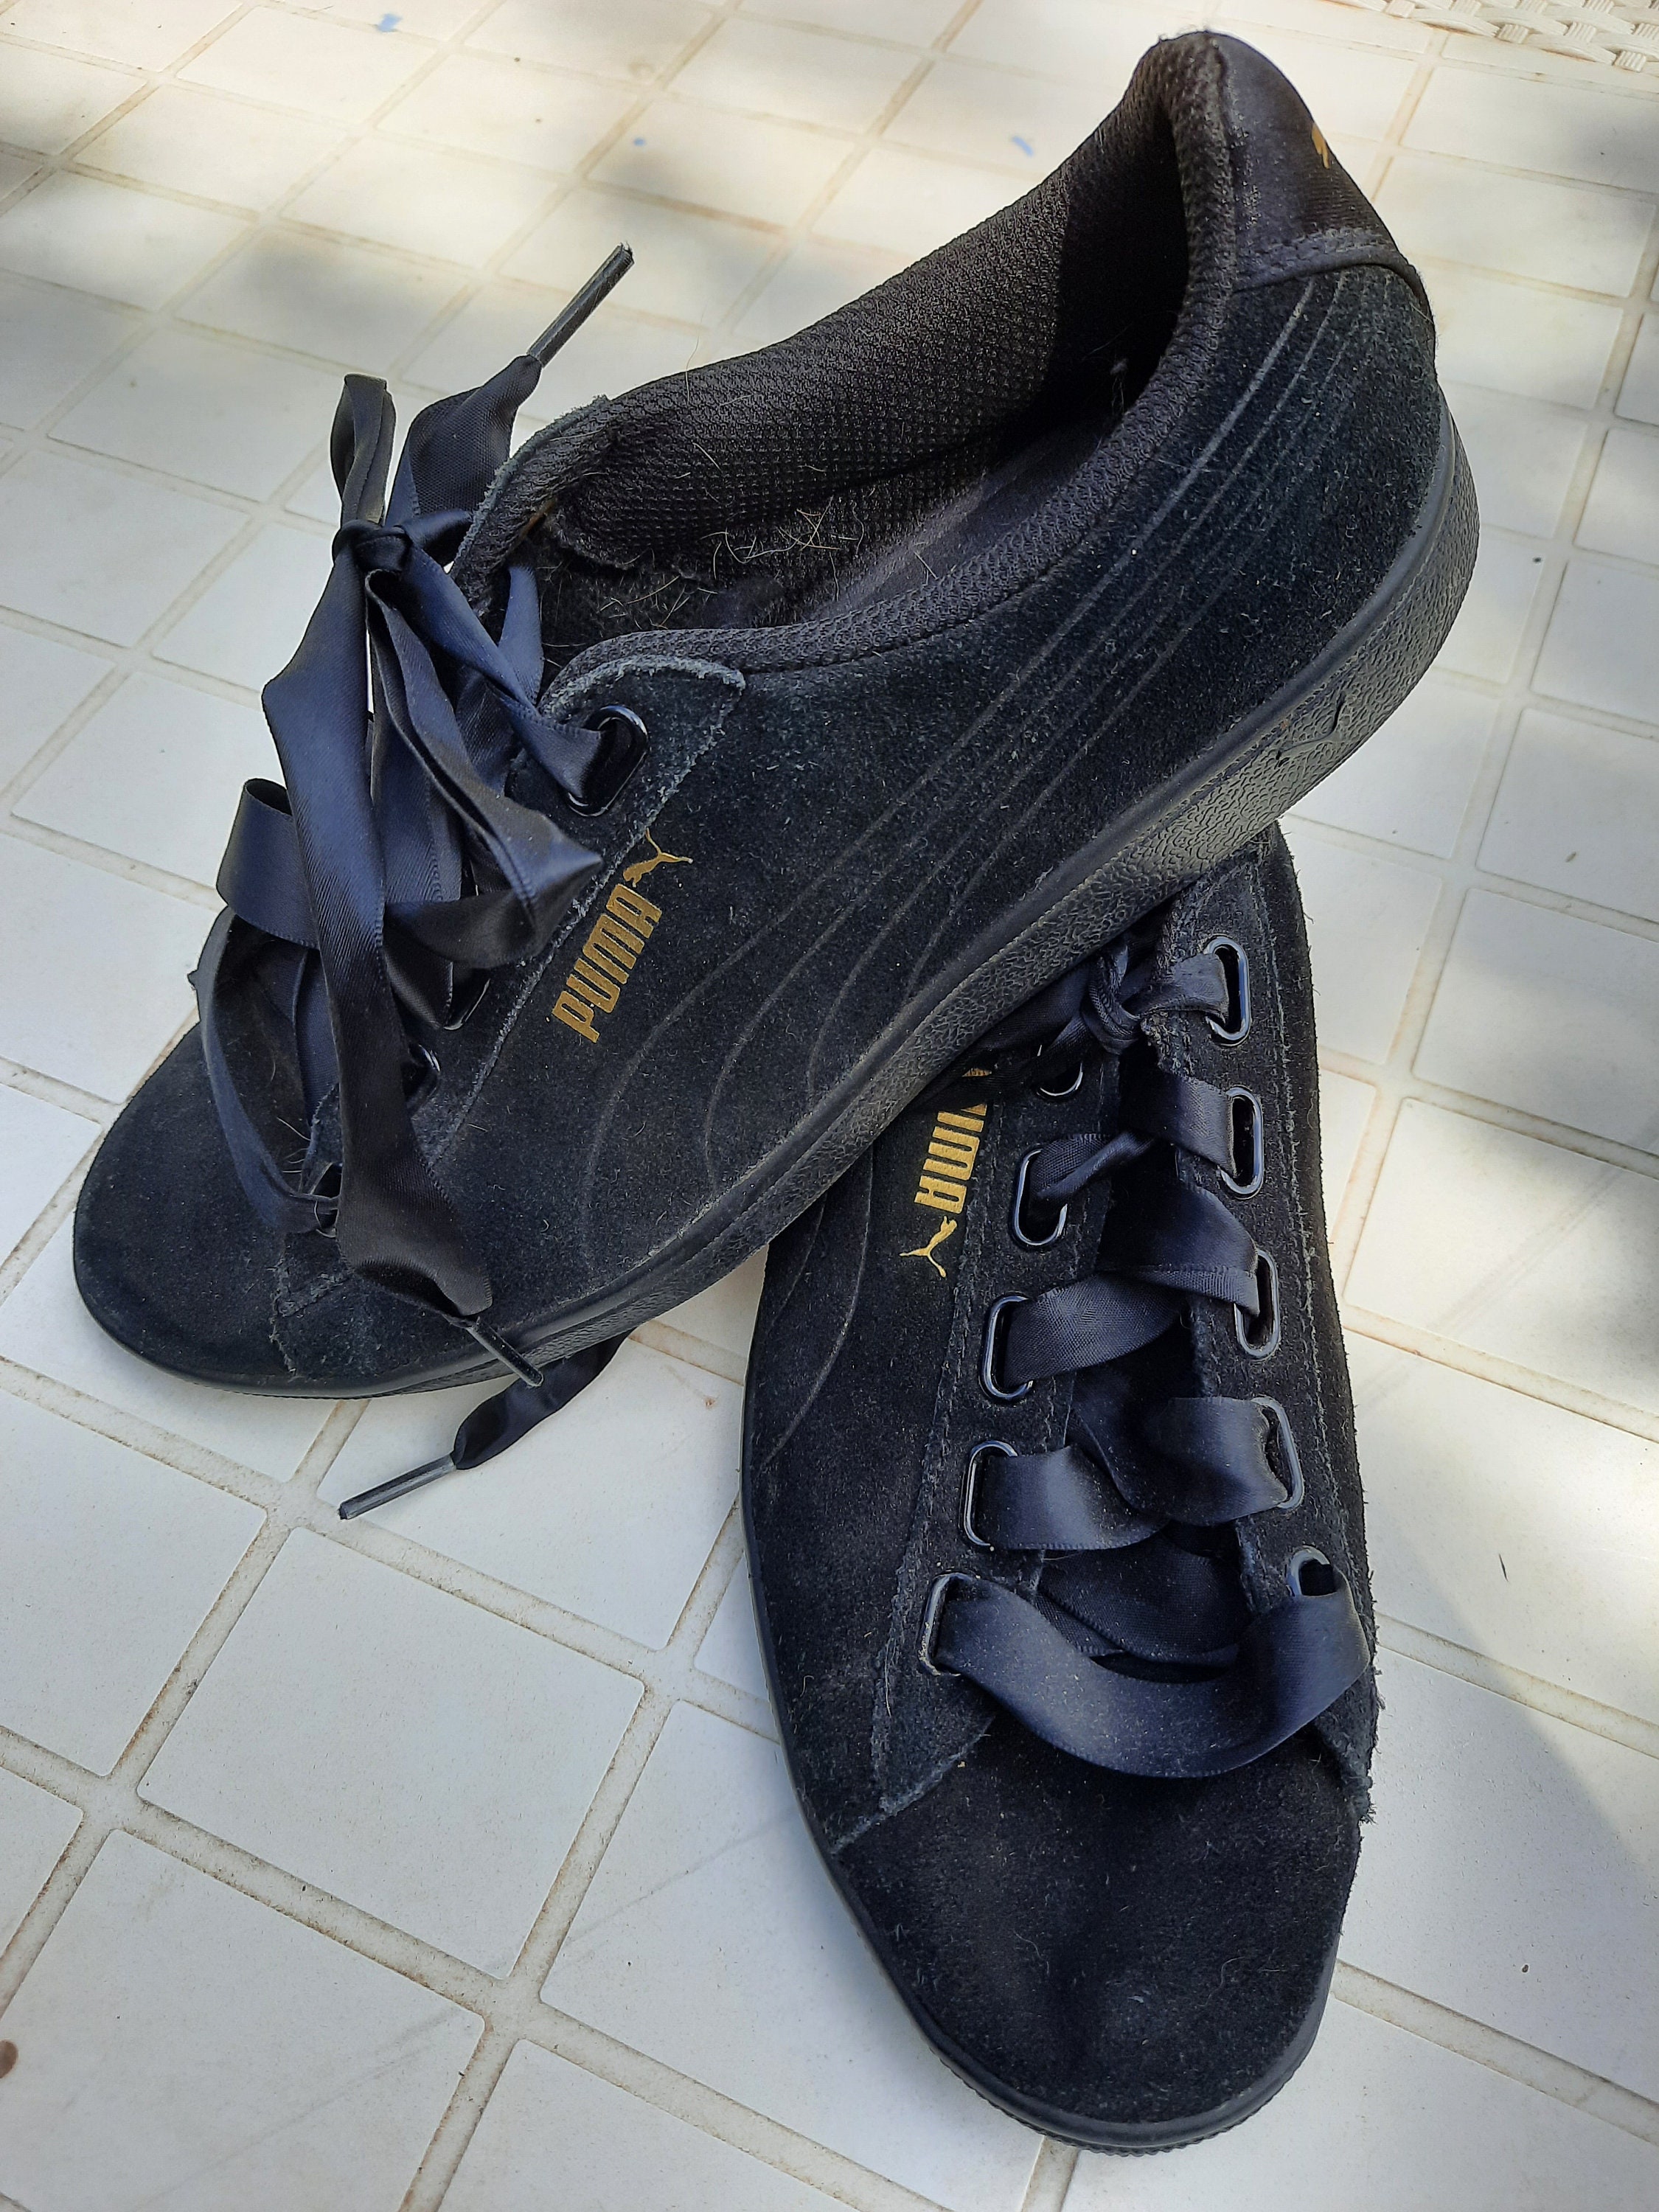 Louis Vuitton - Authenticated Trainer - Suede Black for Men, Very Good Condition